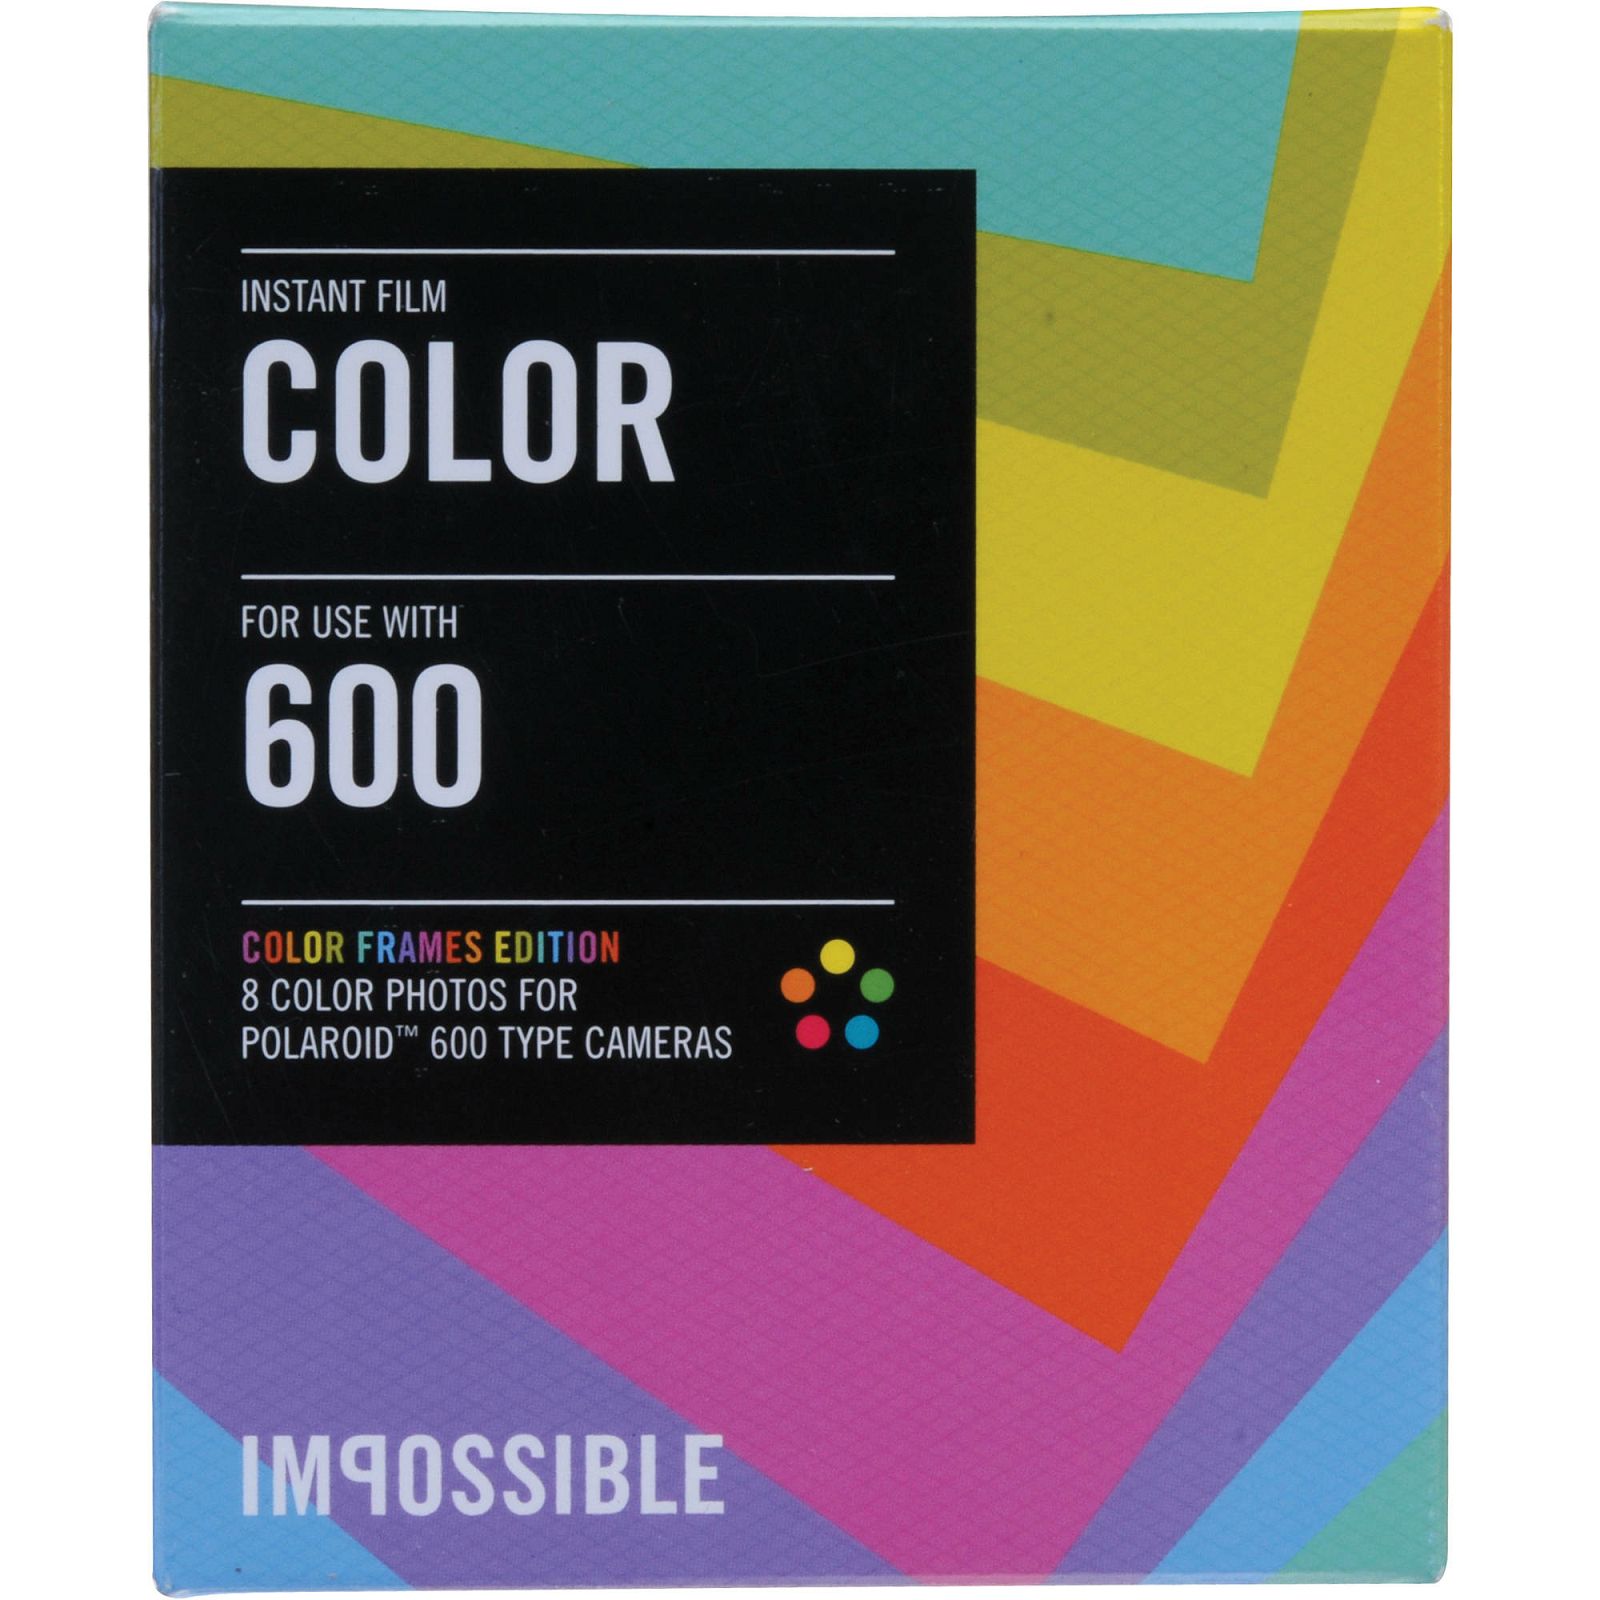 Impossible Instant Color Film with Color Frames for Polaroid 600-Type Cameras 600 Color Multicolor Frame (2959)